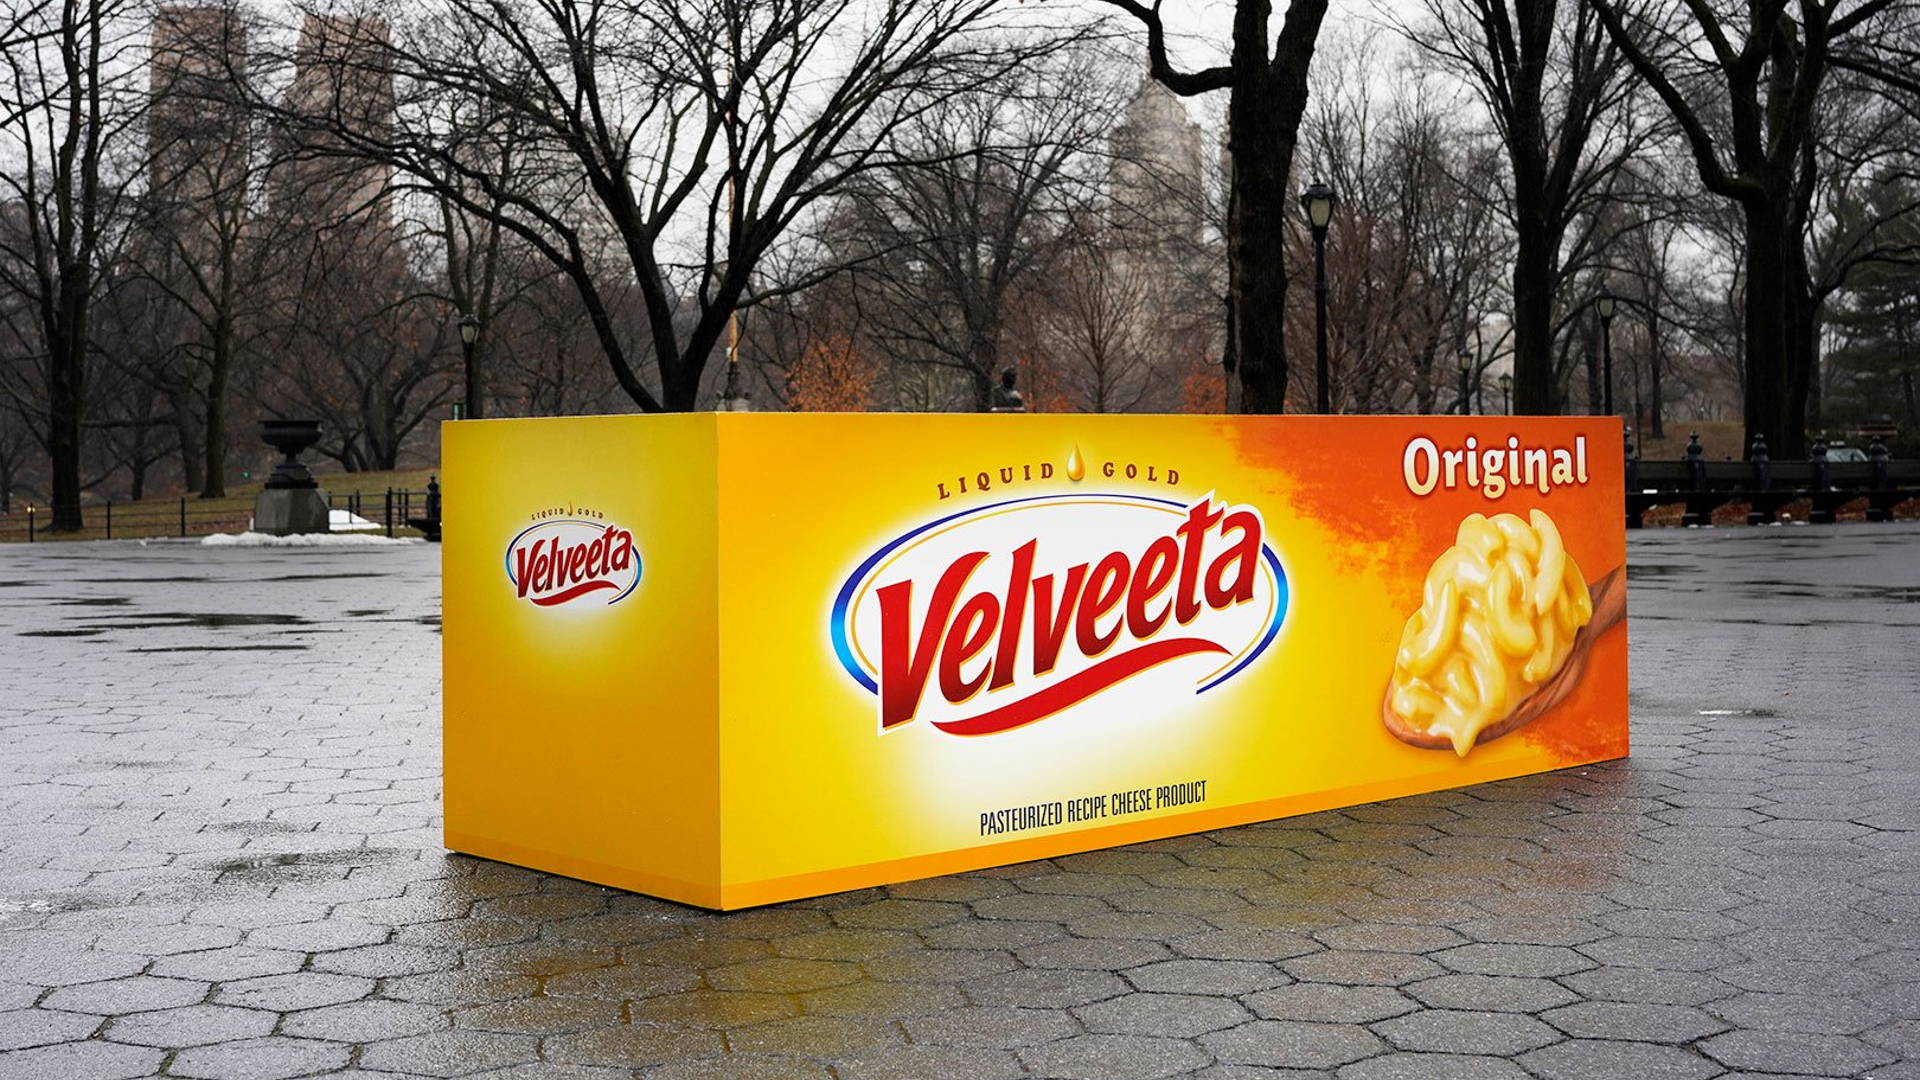 Featured image for That's Not an Art Installation, It's an 8-Foot Box of Velveeta